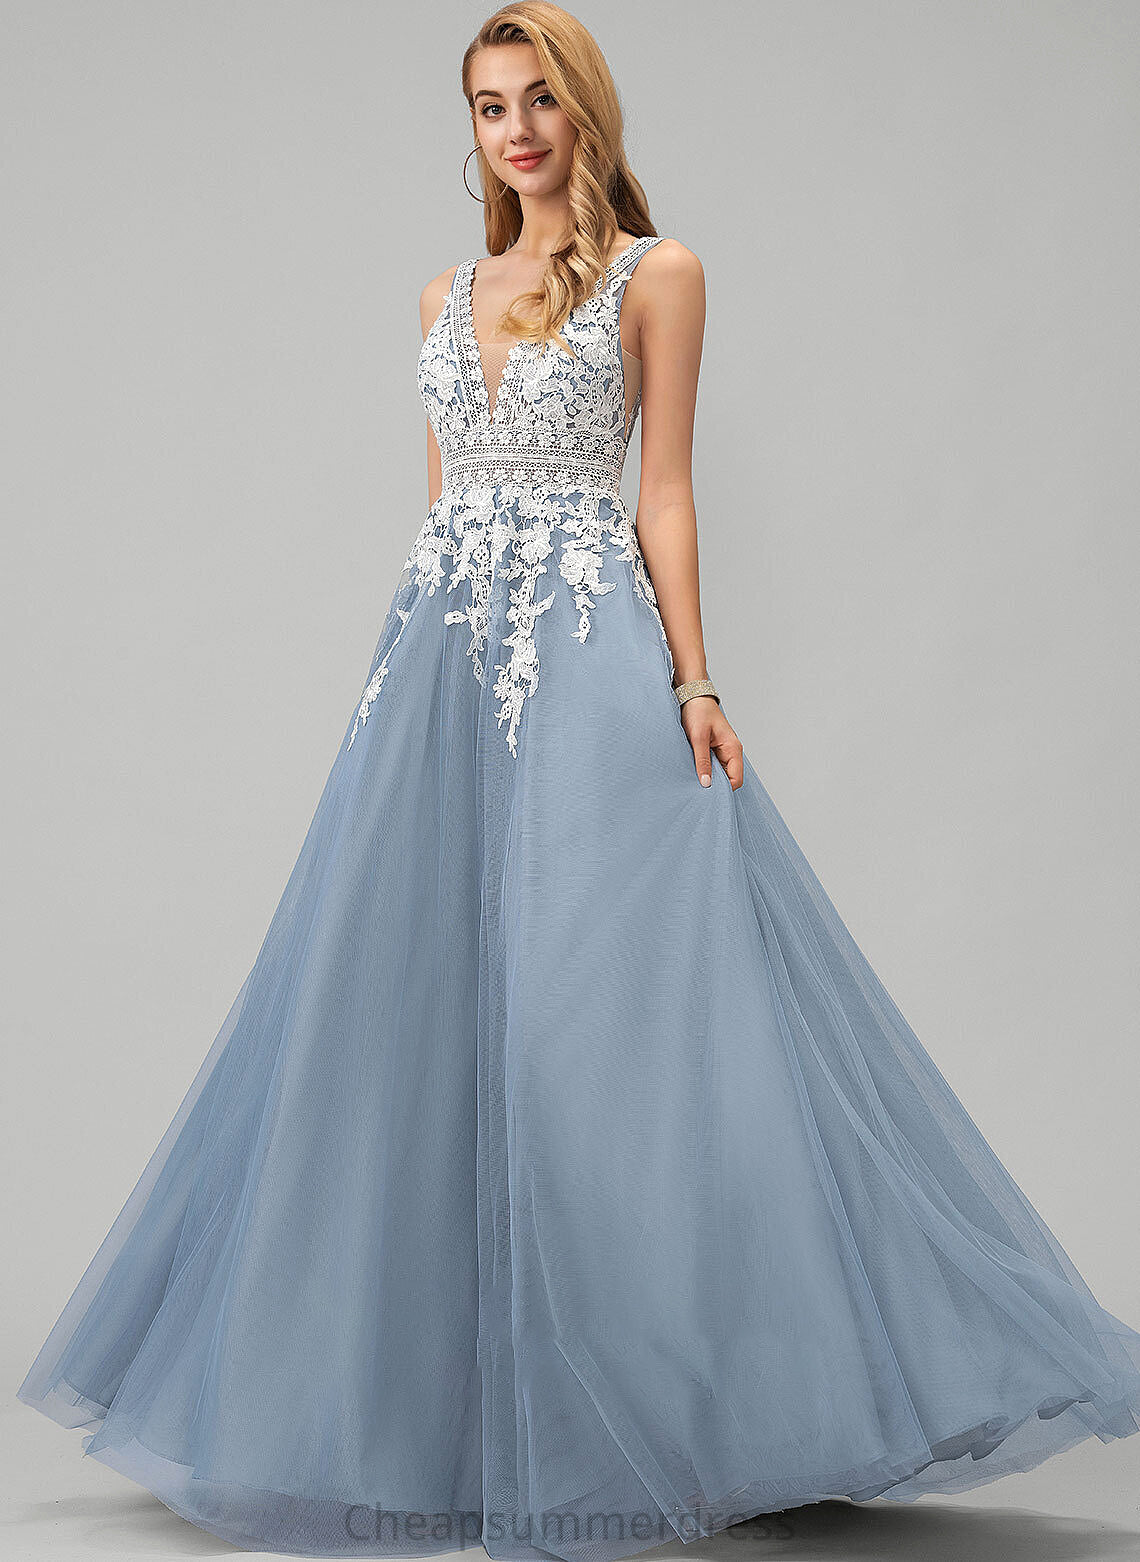 Lace Katrina Tulle Floor-Length With Ball-Gown/Princess Prom Dresses V-neck